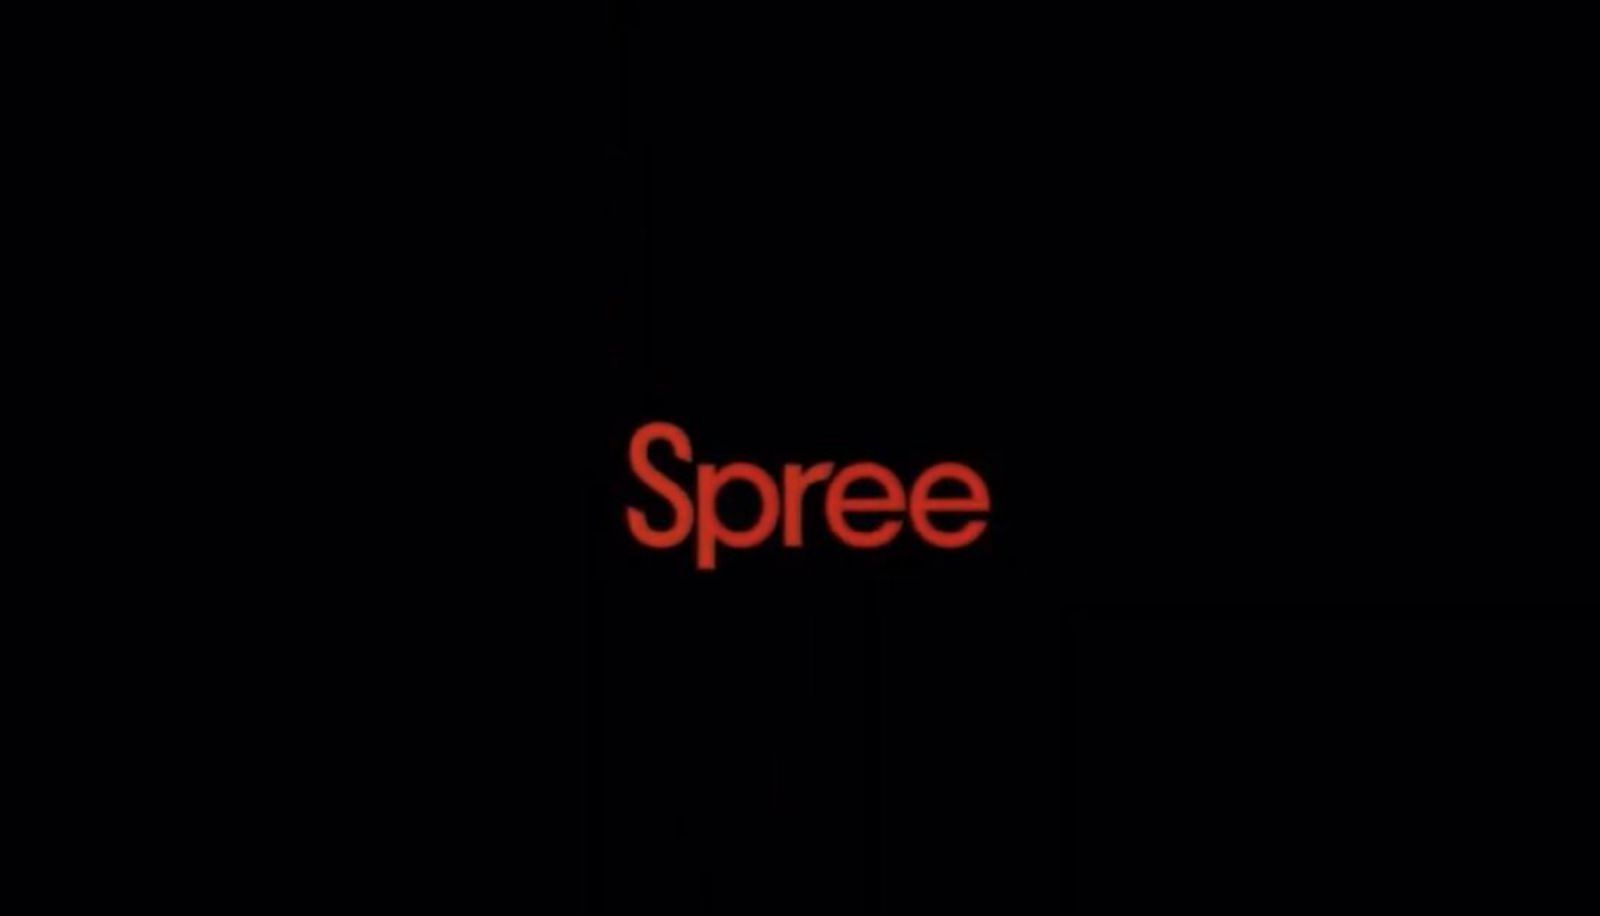 Is Spree a True Story? Is the 2020 Movie Based on Real Life?